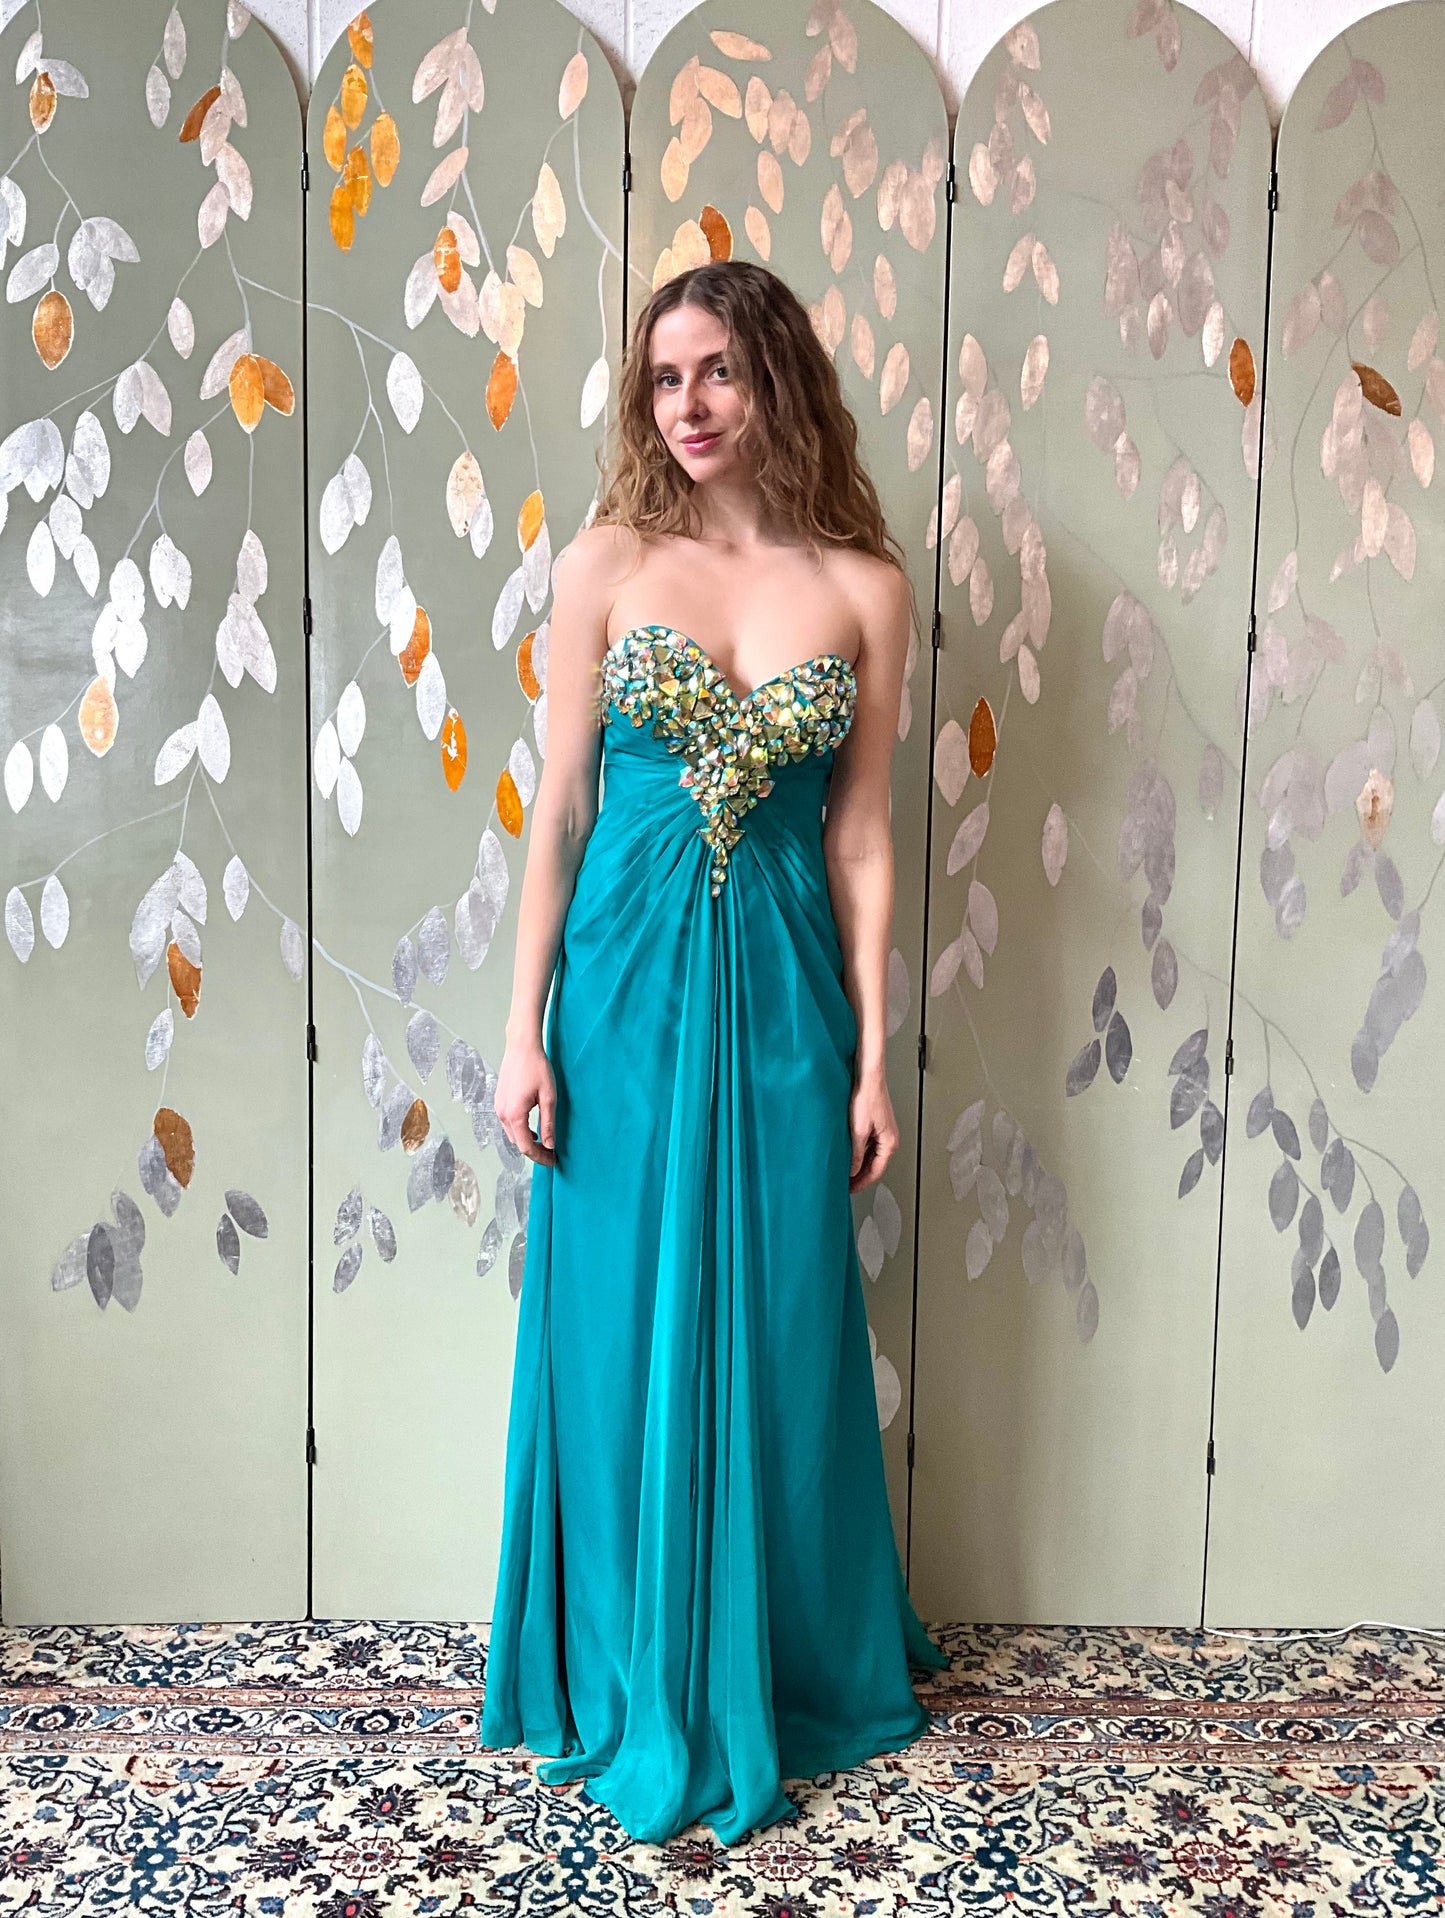 2000s Teal Green Chiffon Embellished Mermaid Gown, XS